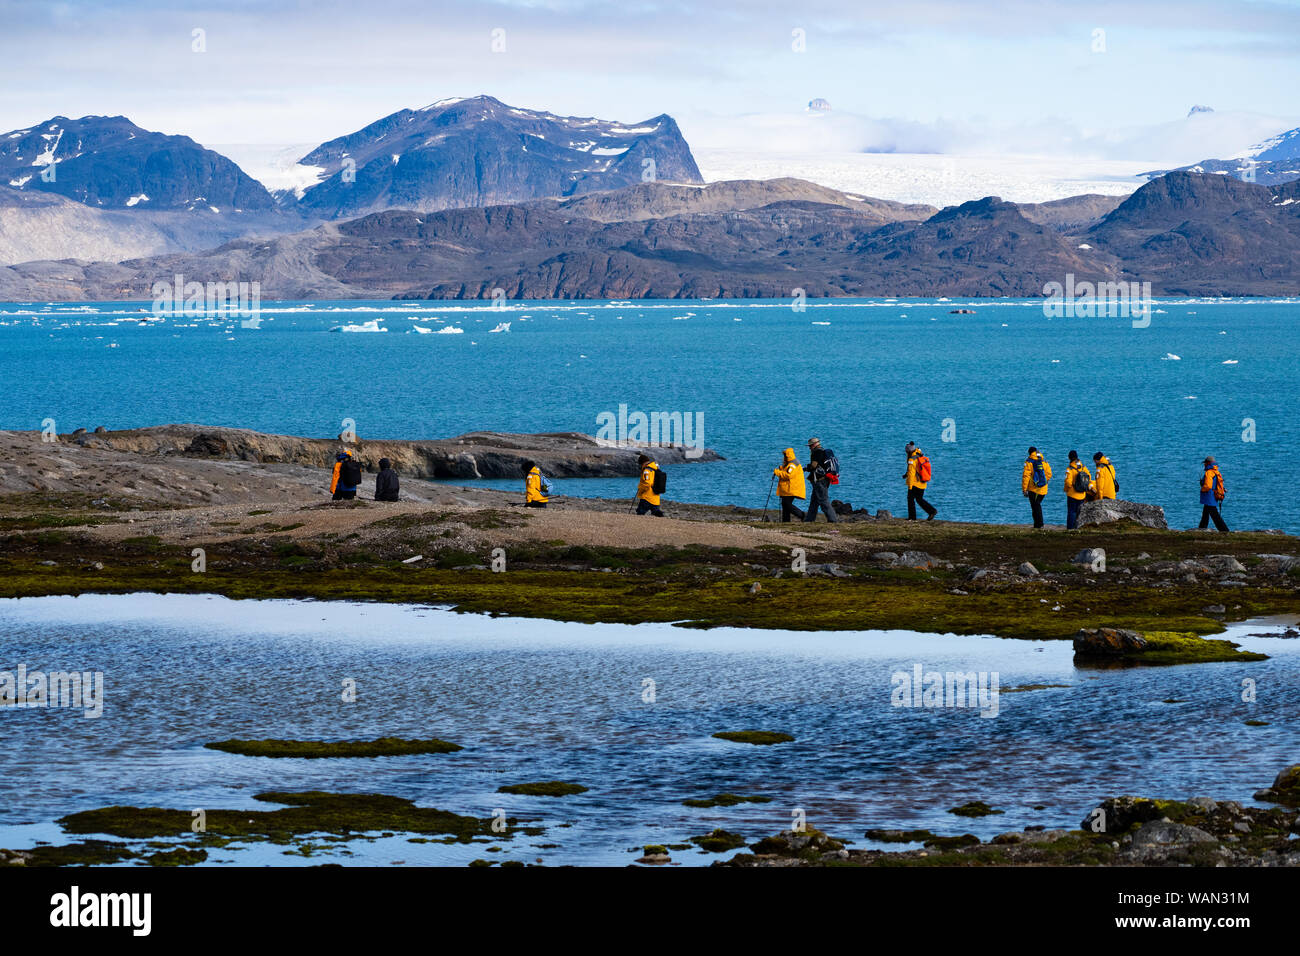 A group of travelers in the Arctic Spitzbergen landscape Stock Photo